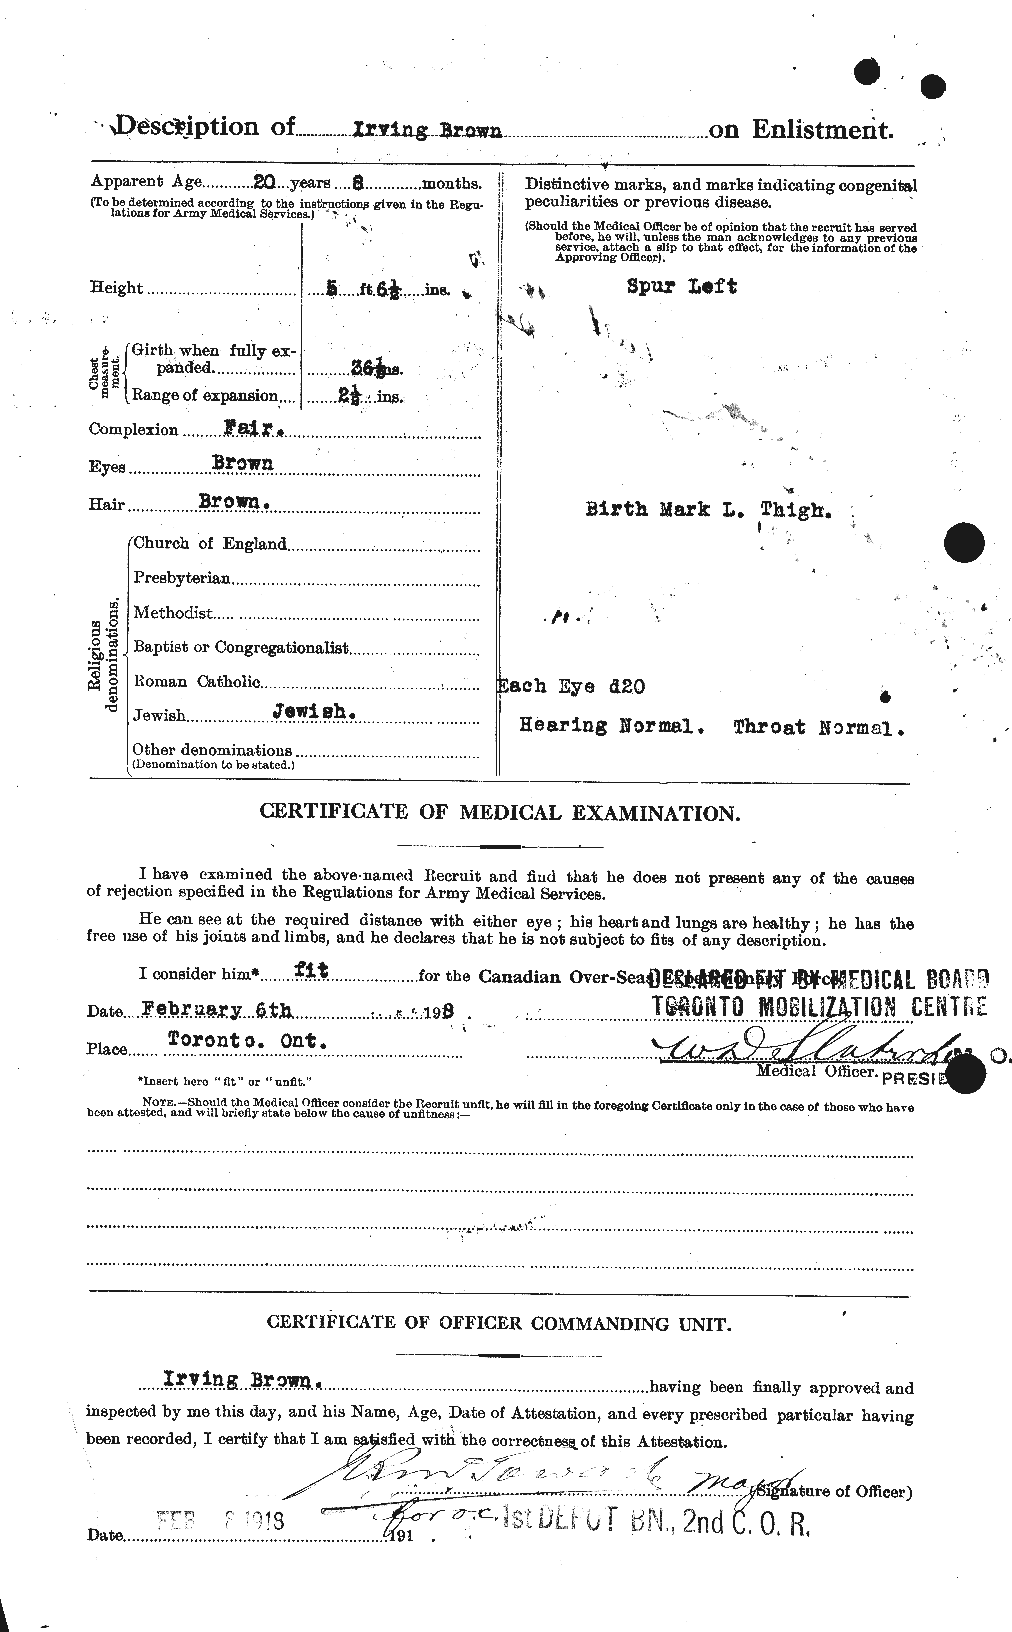 Personnel Records of the First World War - CEF 265660b